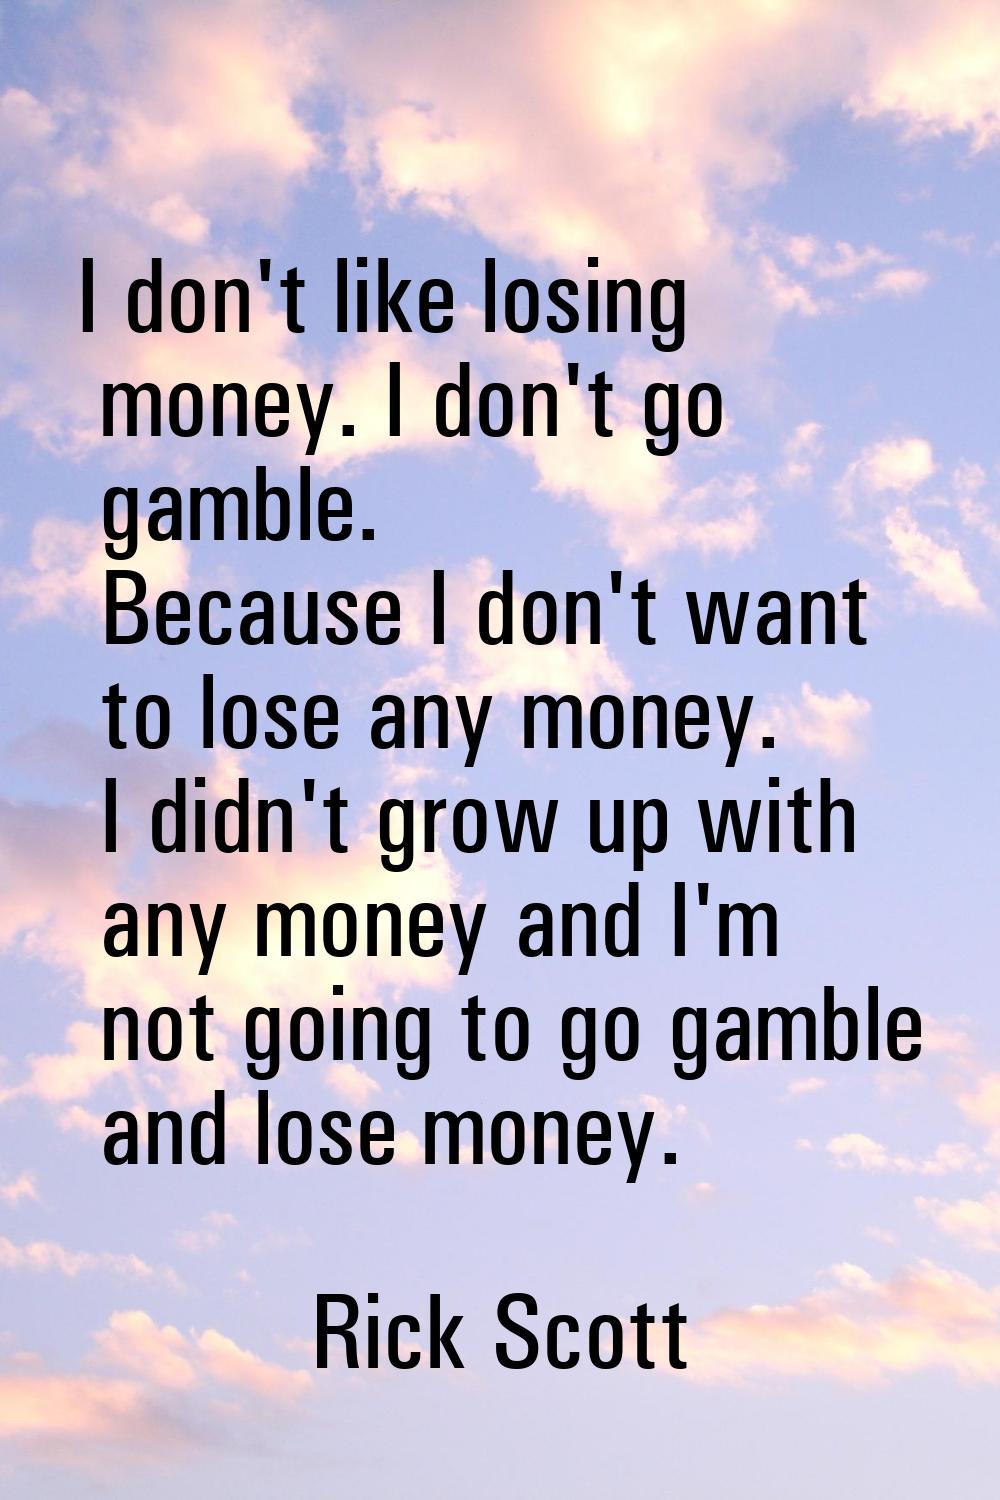 I don't like losing money. I don't go gamble. Because I don't want to lose any money. I didn't grow